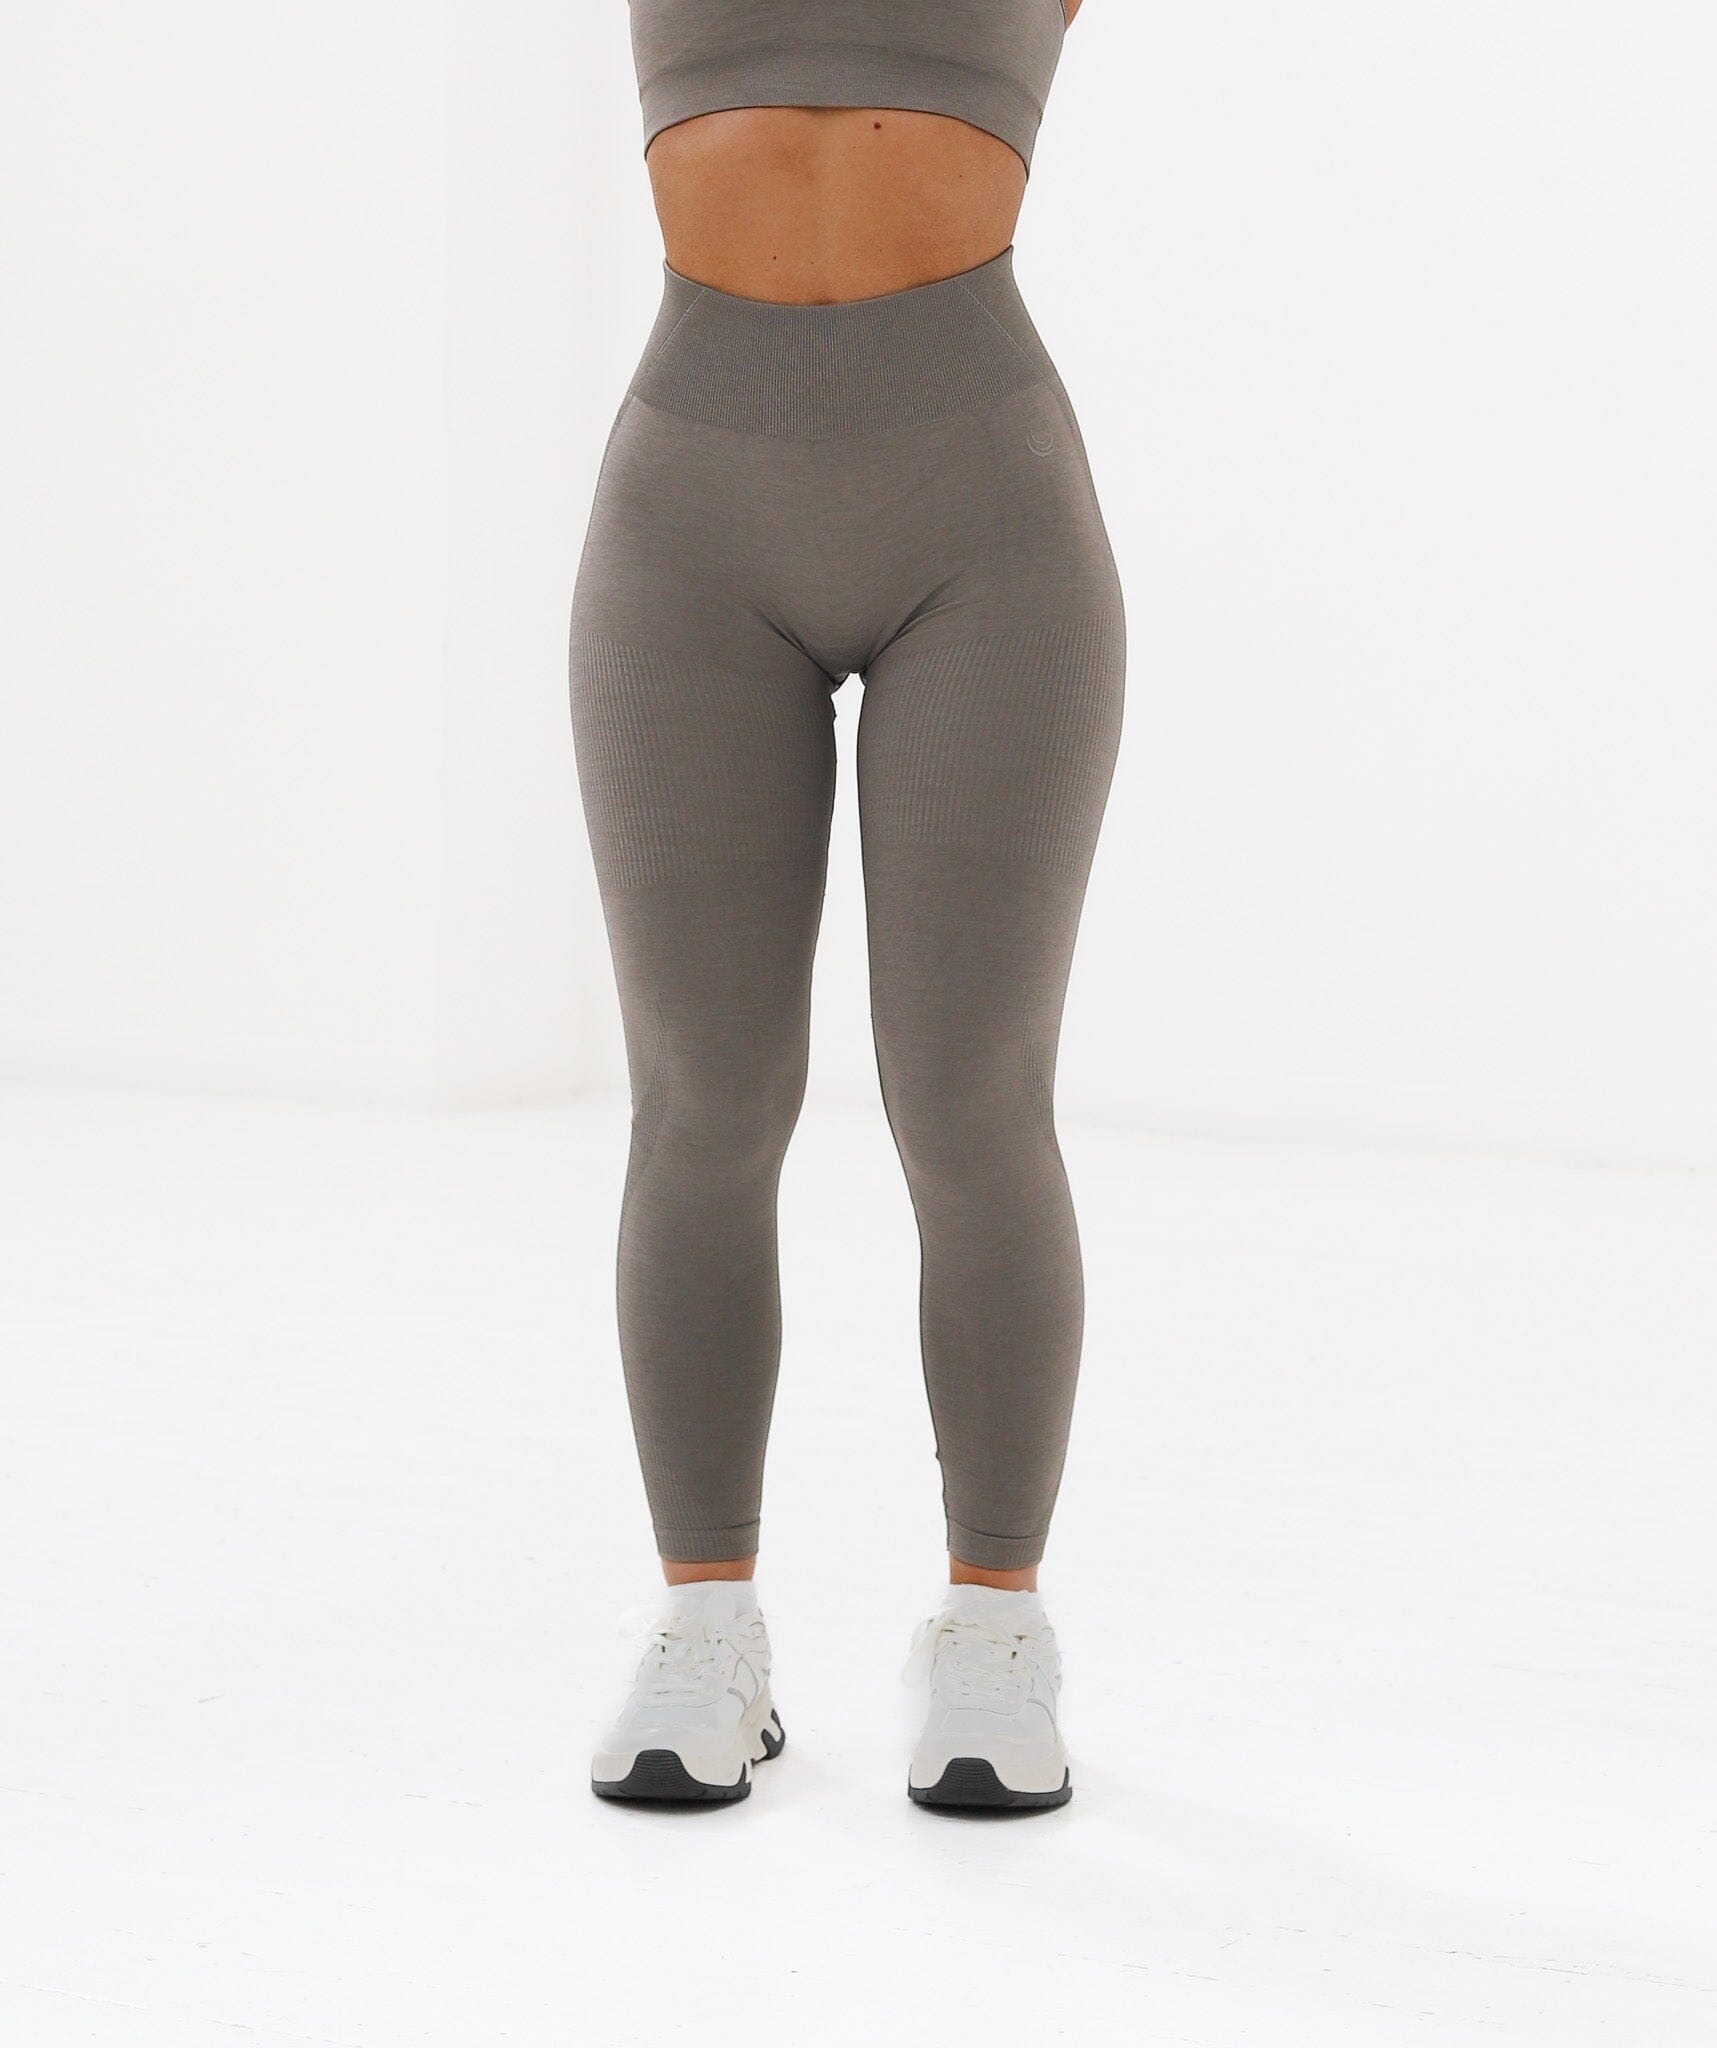 Forever 21 Women's Active Seamless High-Rise Leggings in Taupe